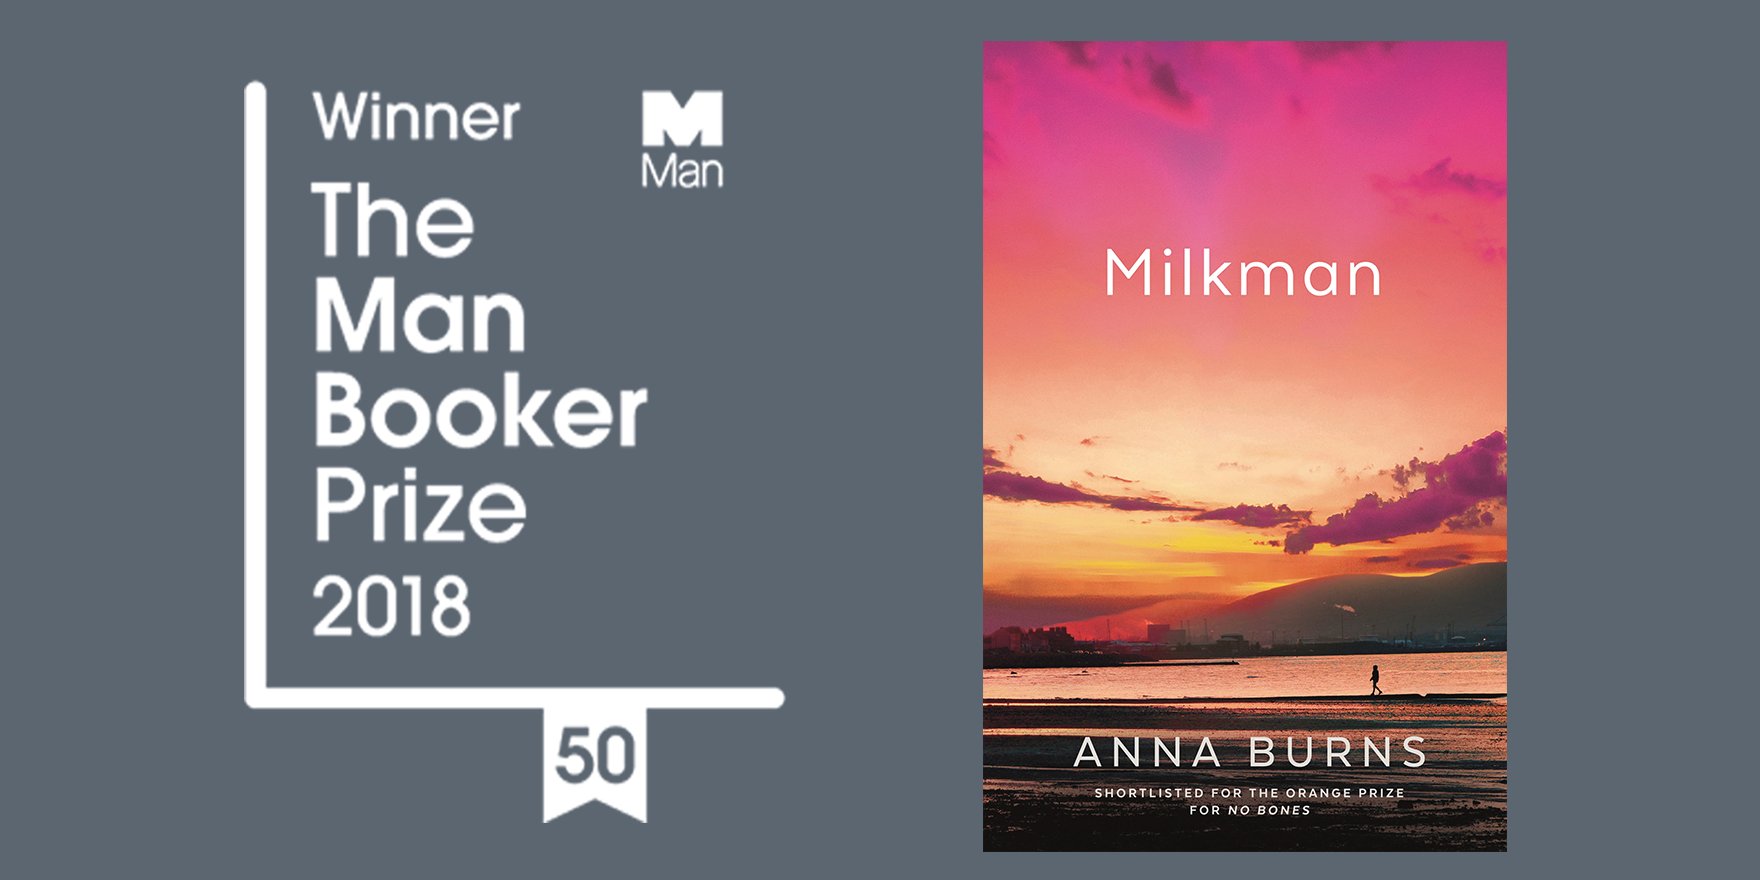 Man Booker Prize was announced on October 16, 2018